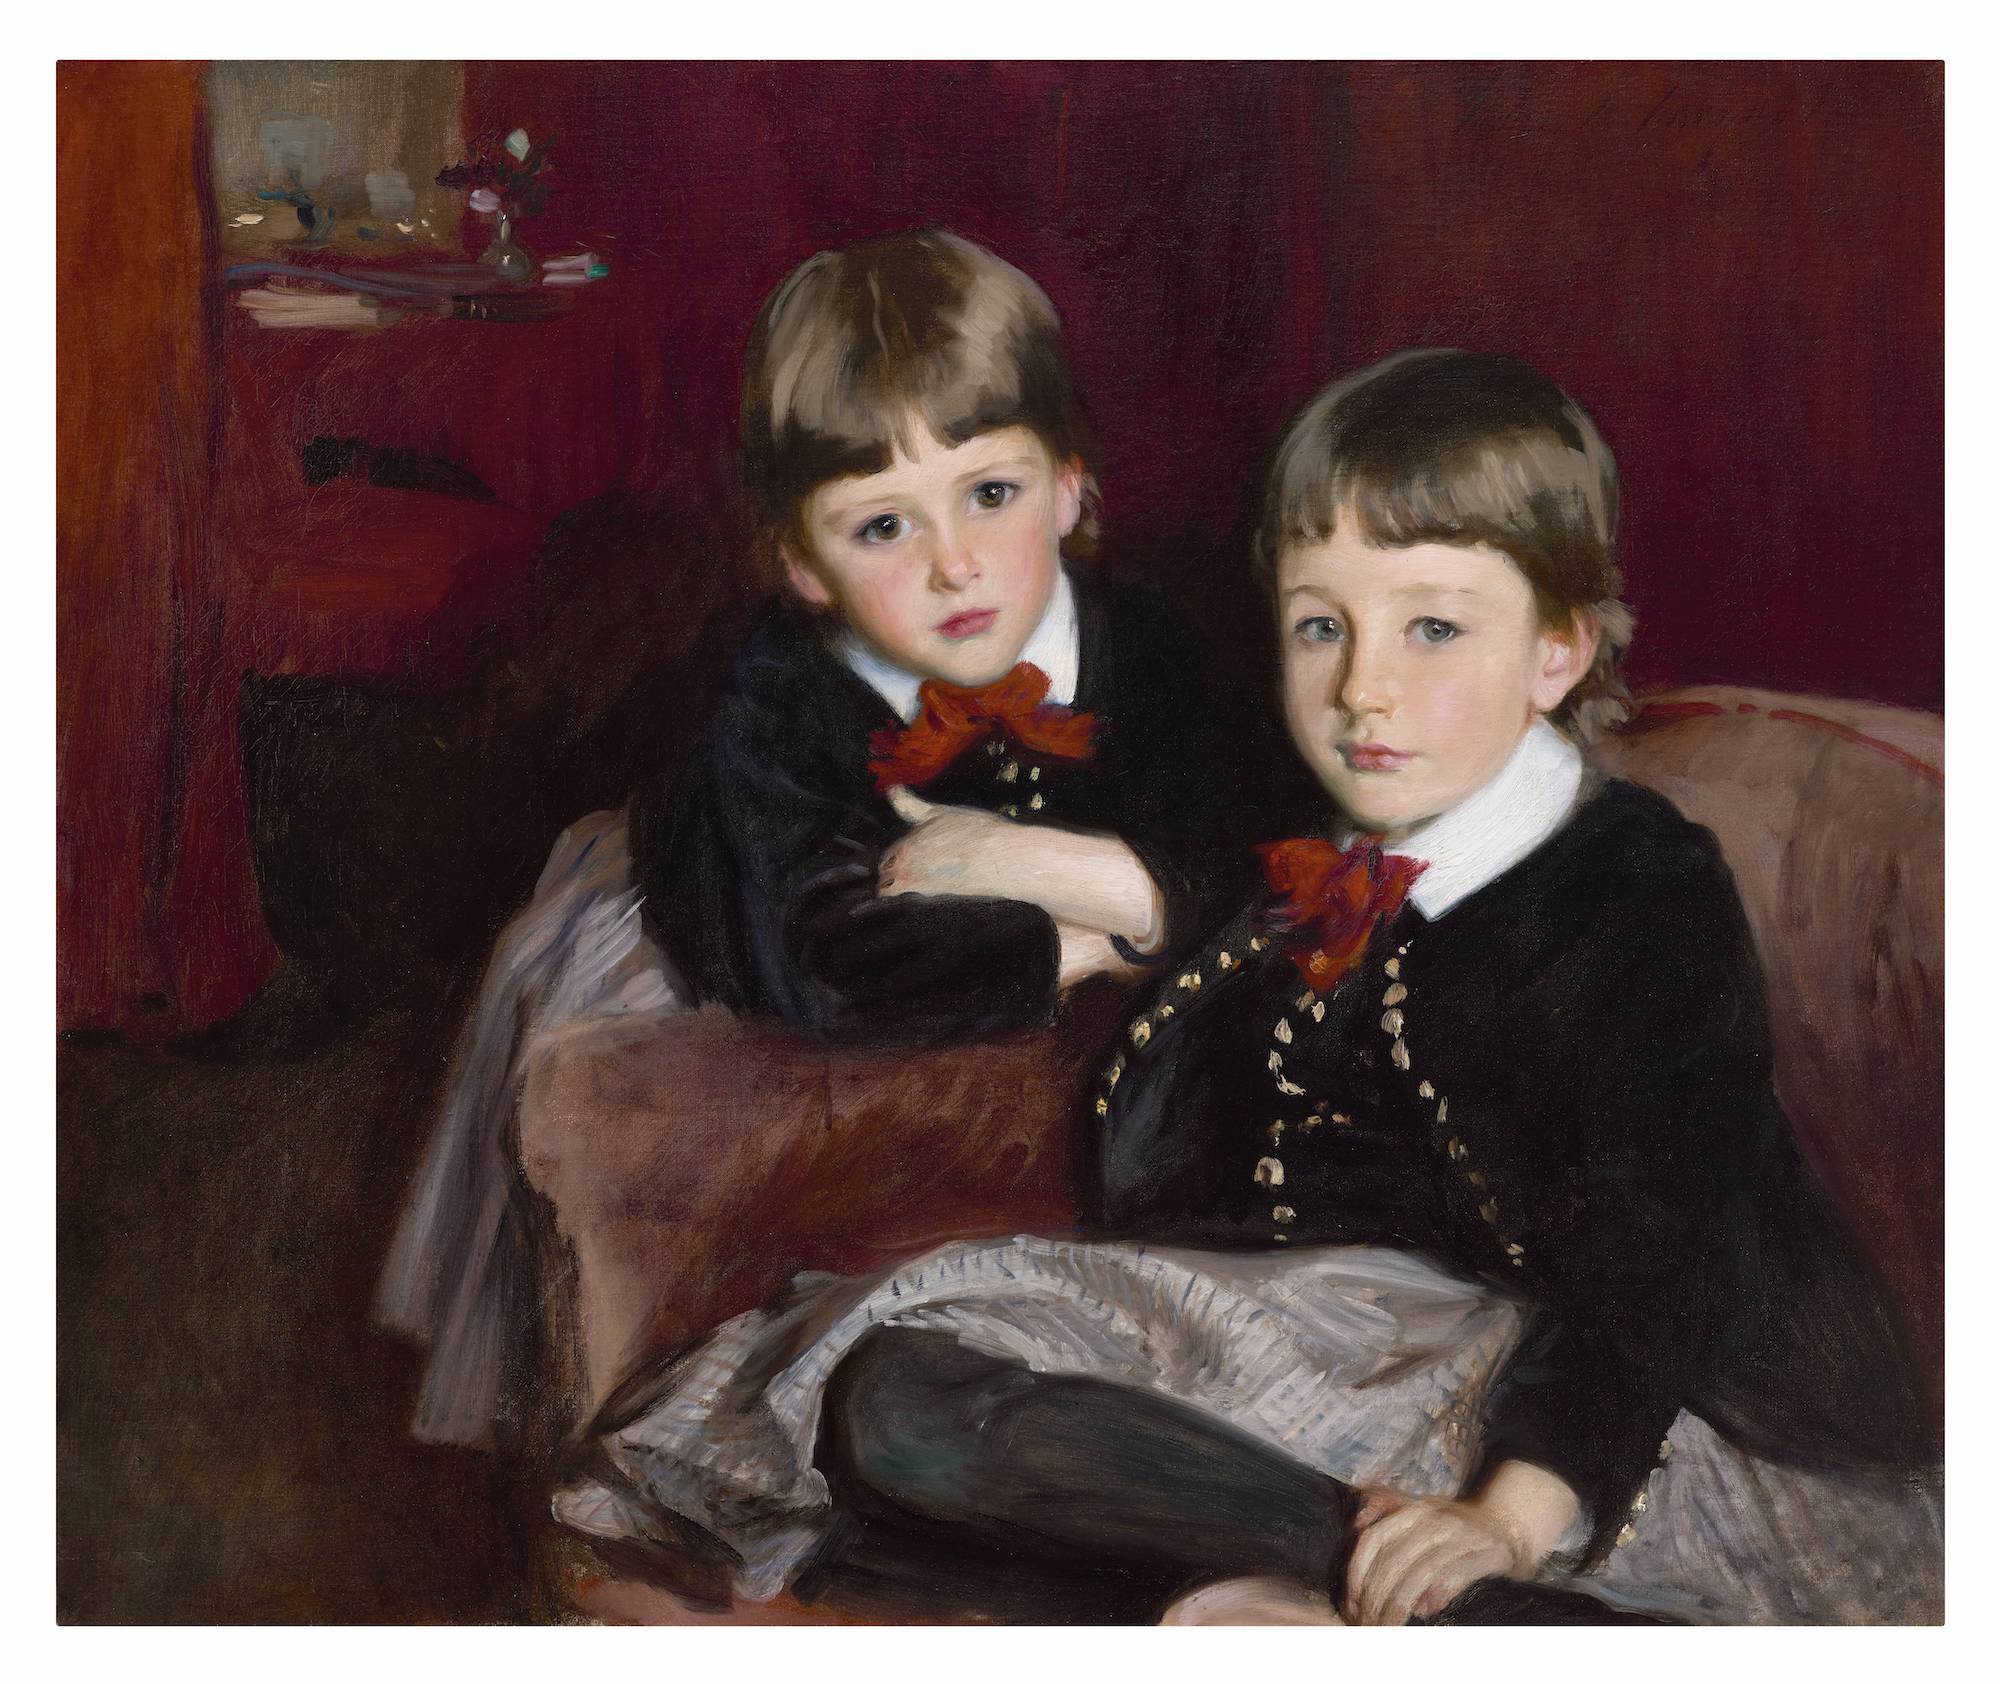 The Sons of Mrs. Malcolm Forbes, 1887-88, John Singer Sargent, oil on canvas, The Fayez S. Sarofim Collection.